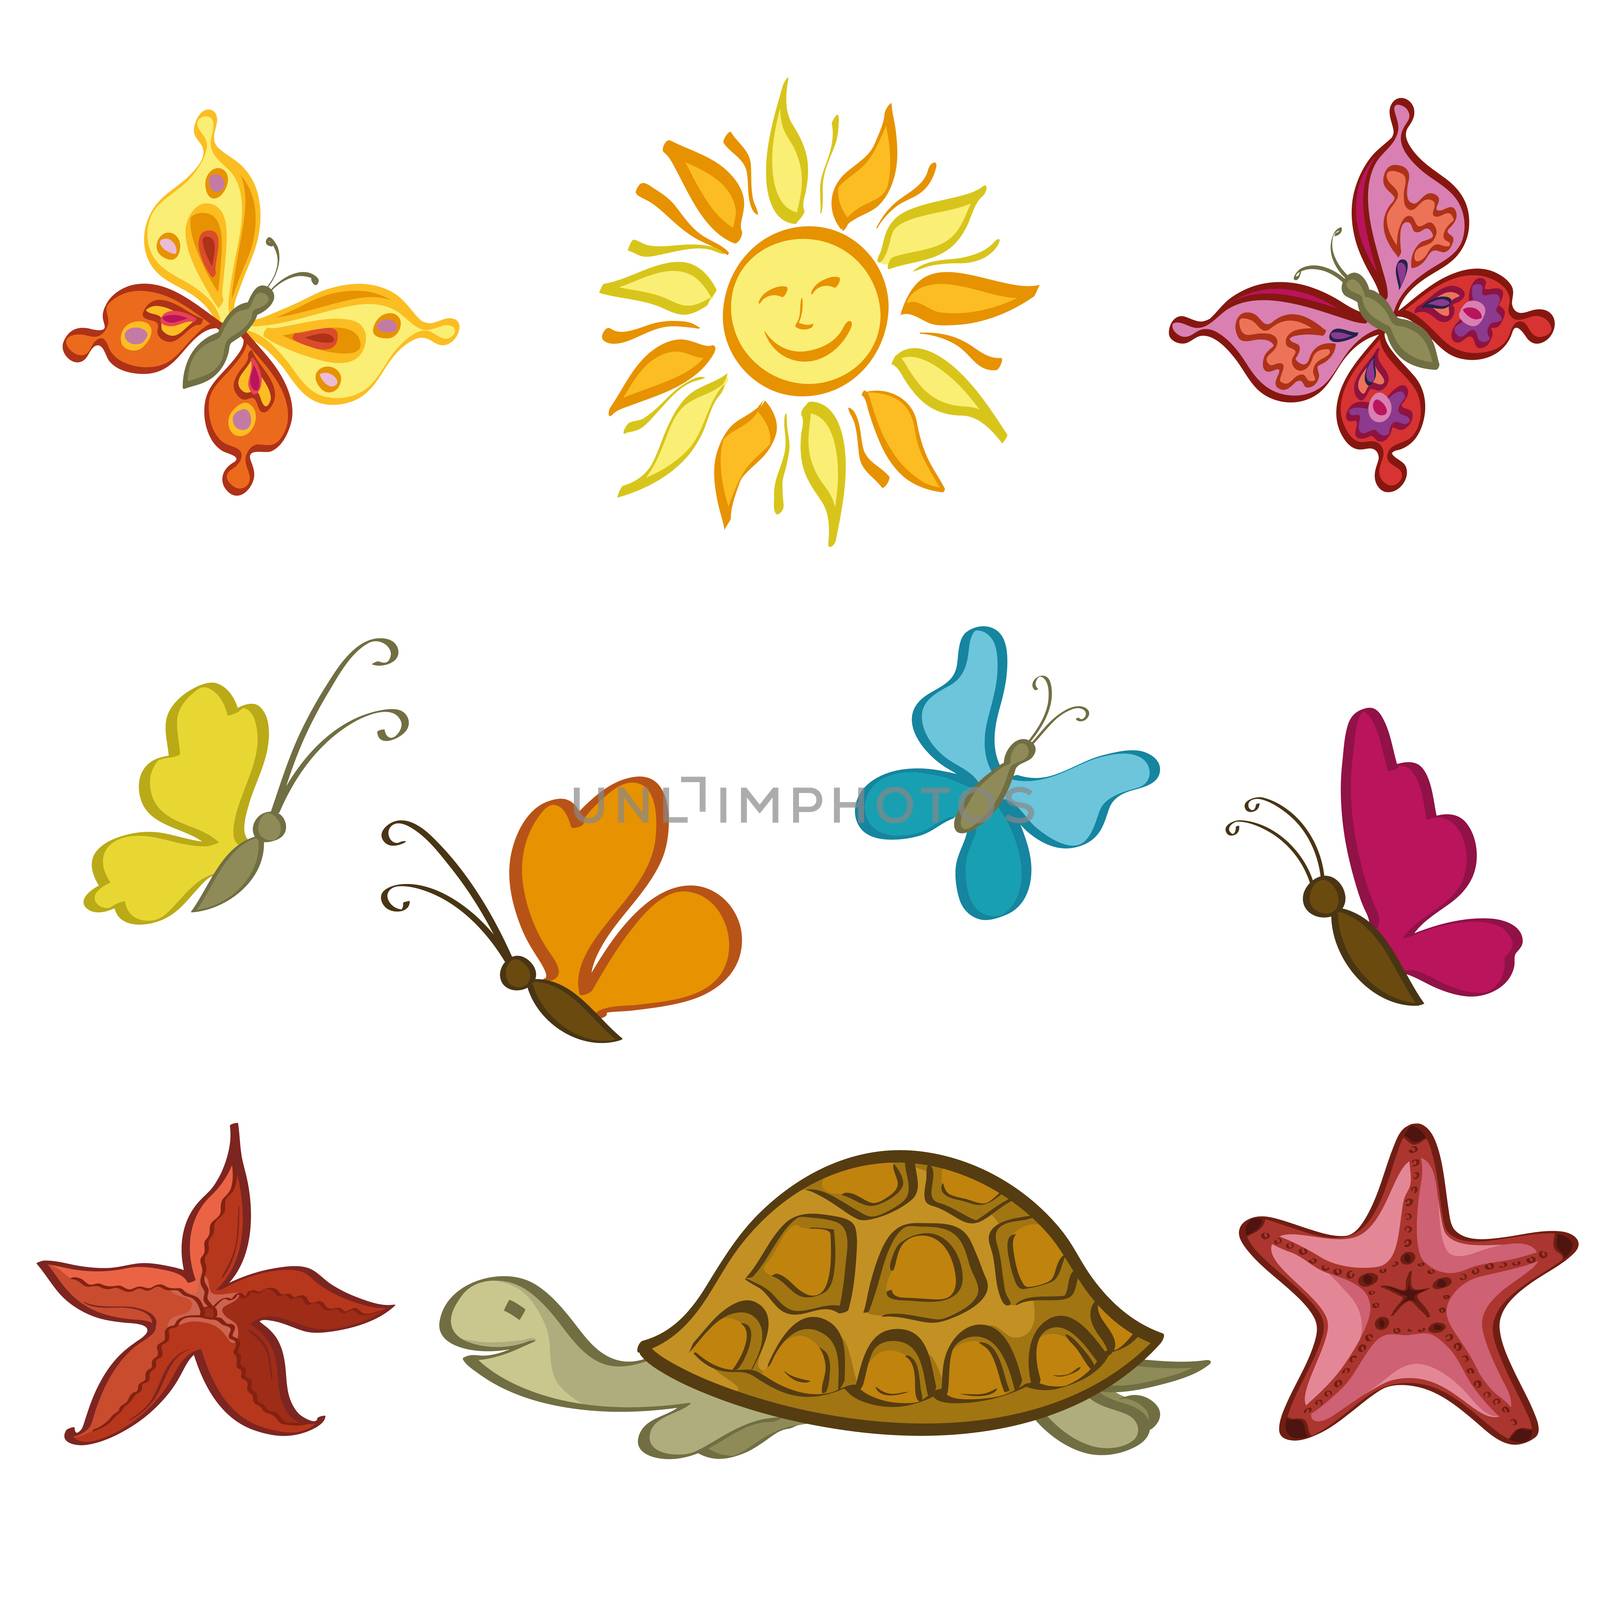 Sun, Butterflies, Turtle and Starfish by alexcoolok